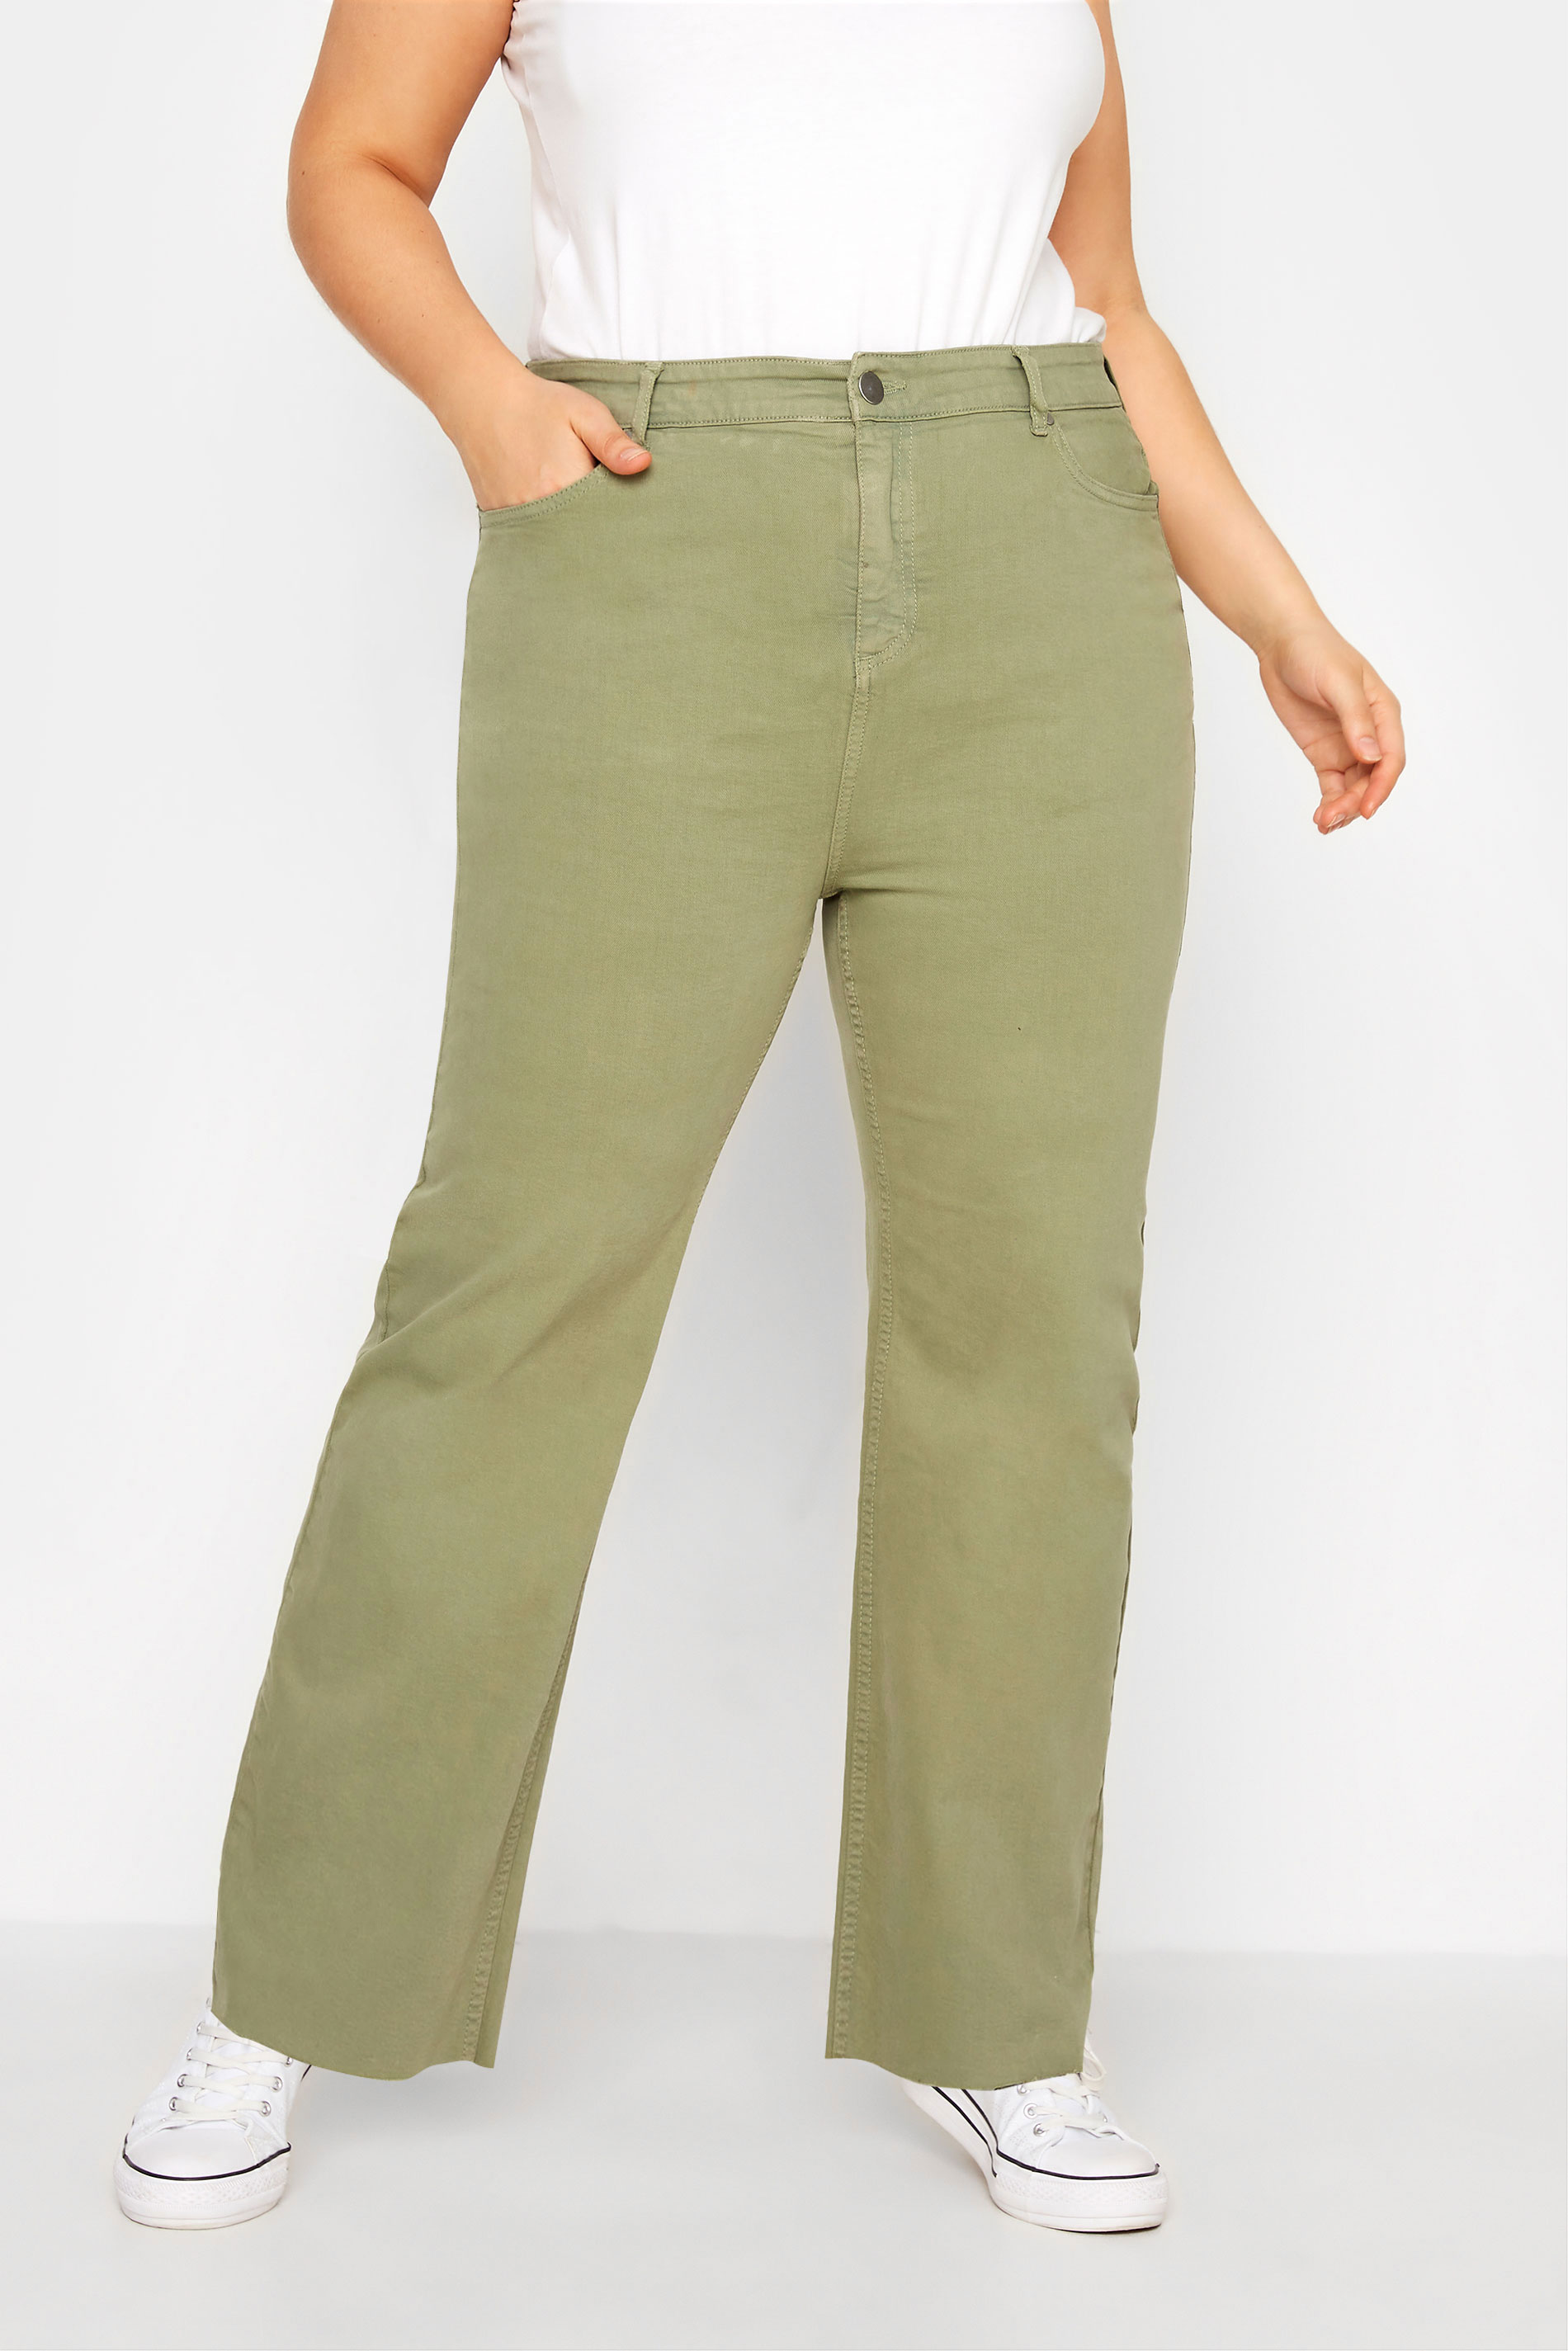 Plus Size Khaki Green Stretch Wide Leg Jeans | Yours Clothing 1